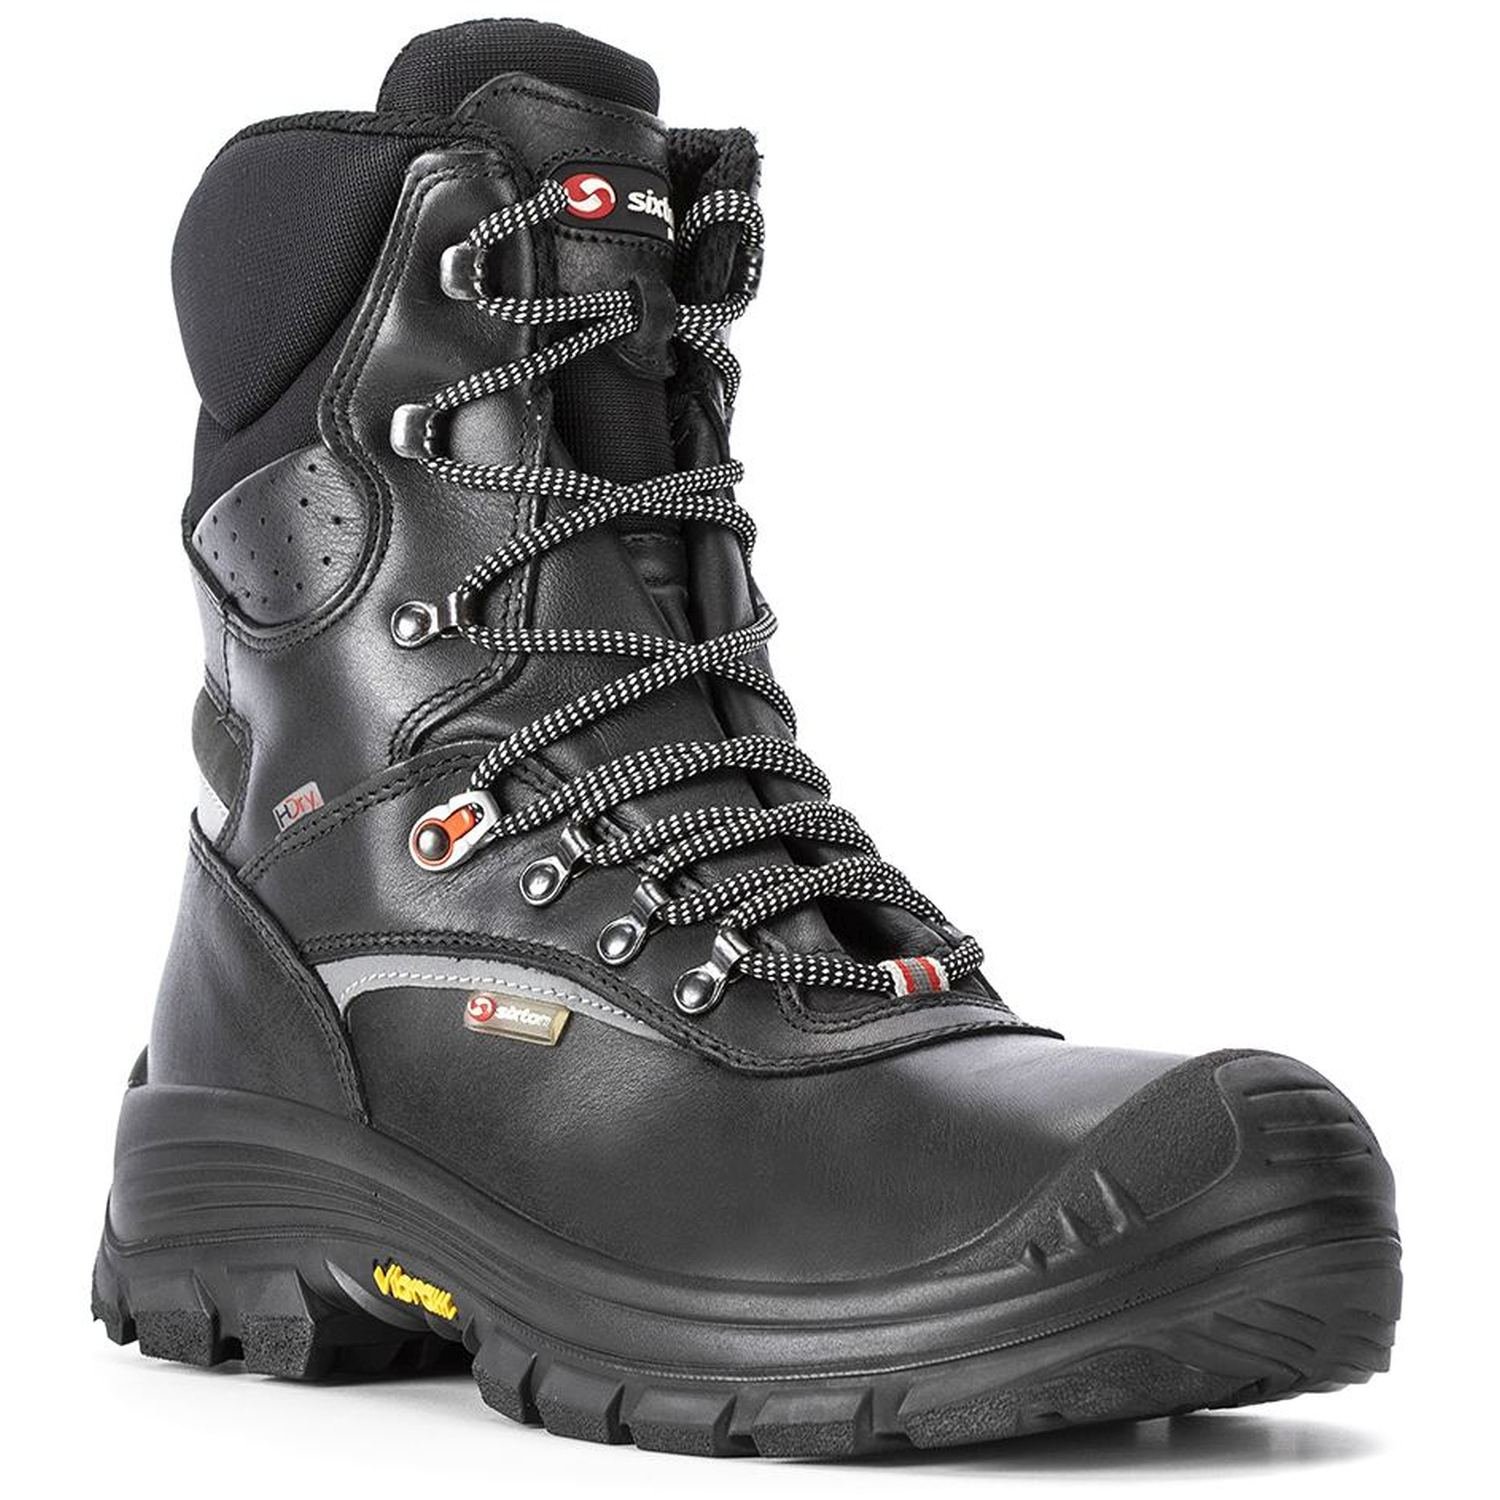 Sixton Peak Empire Outdry Waterproof Anti-Penetration Midsole Lace Up High Leg Safety Boot